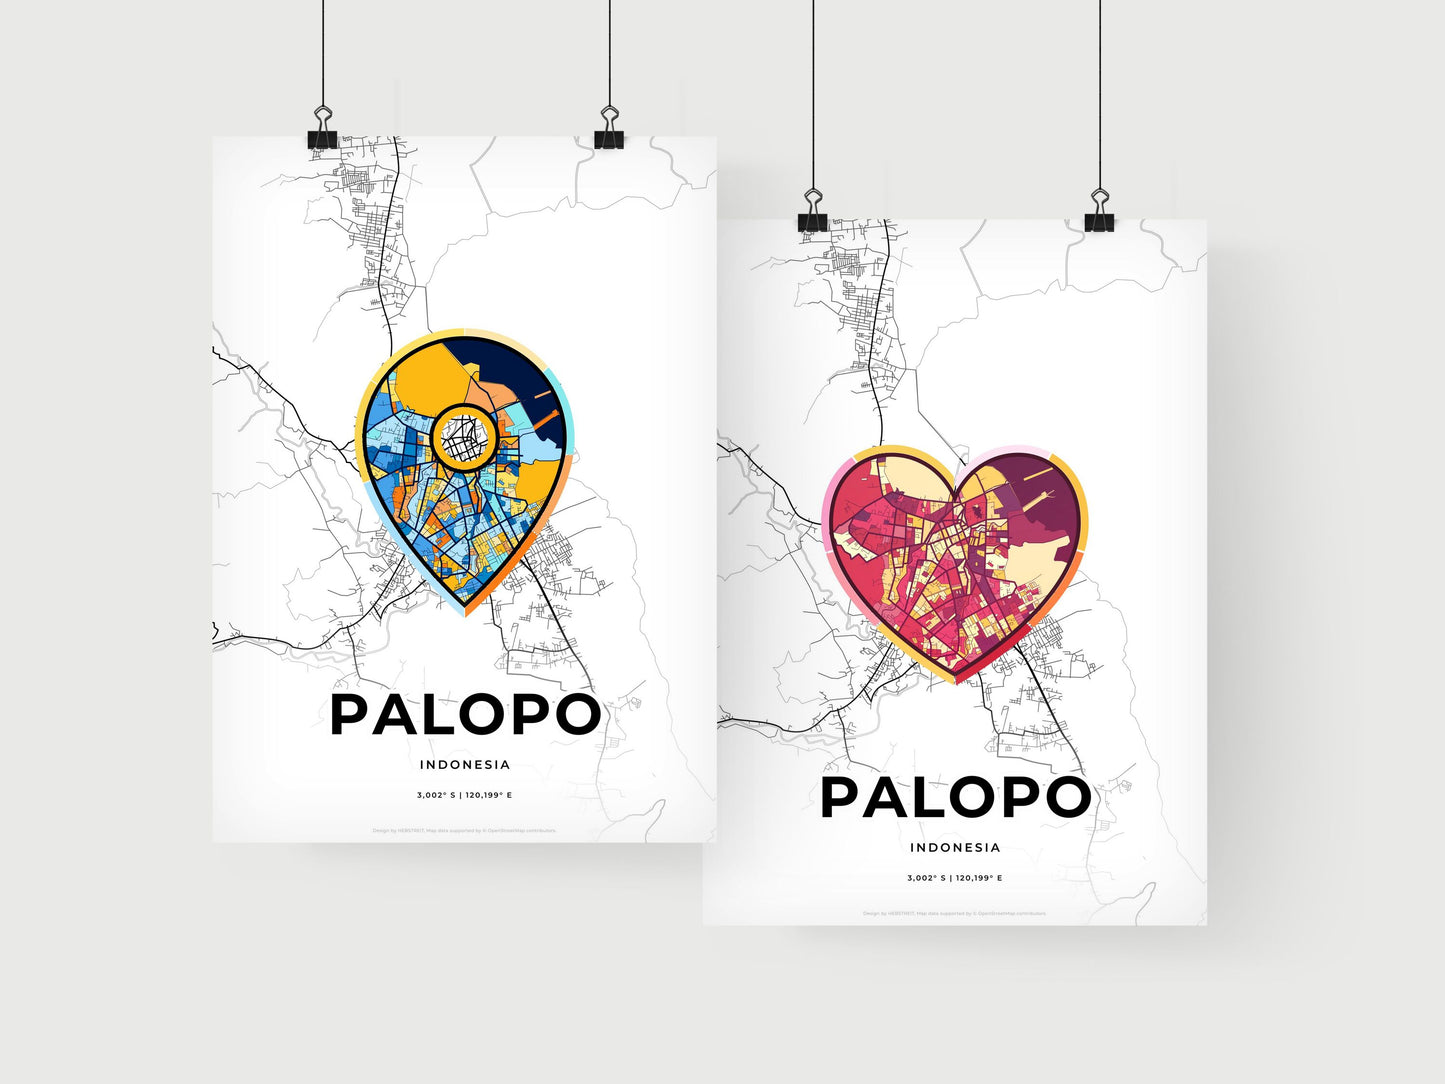 PALOPO INDONESIA minimal art map with a colorful icon.